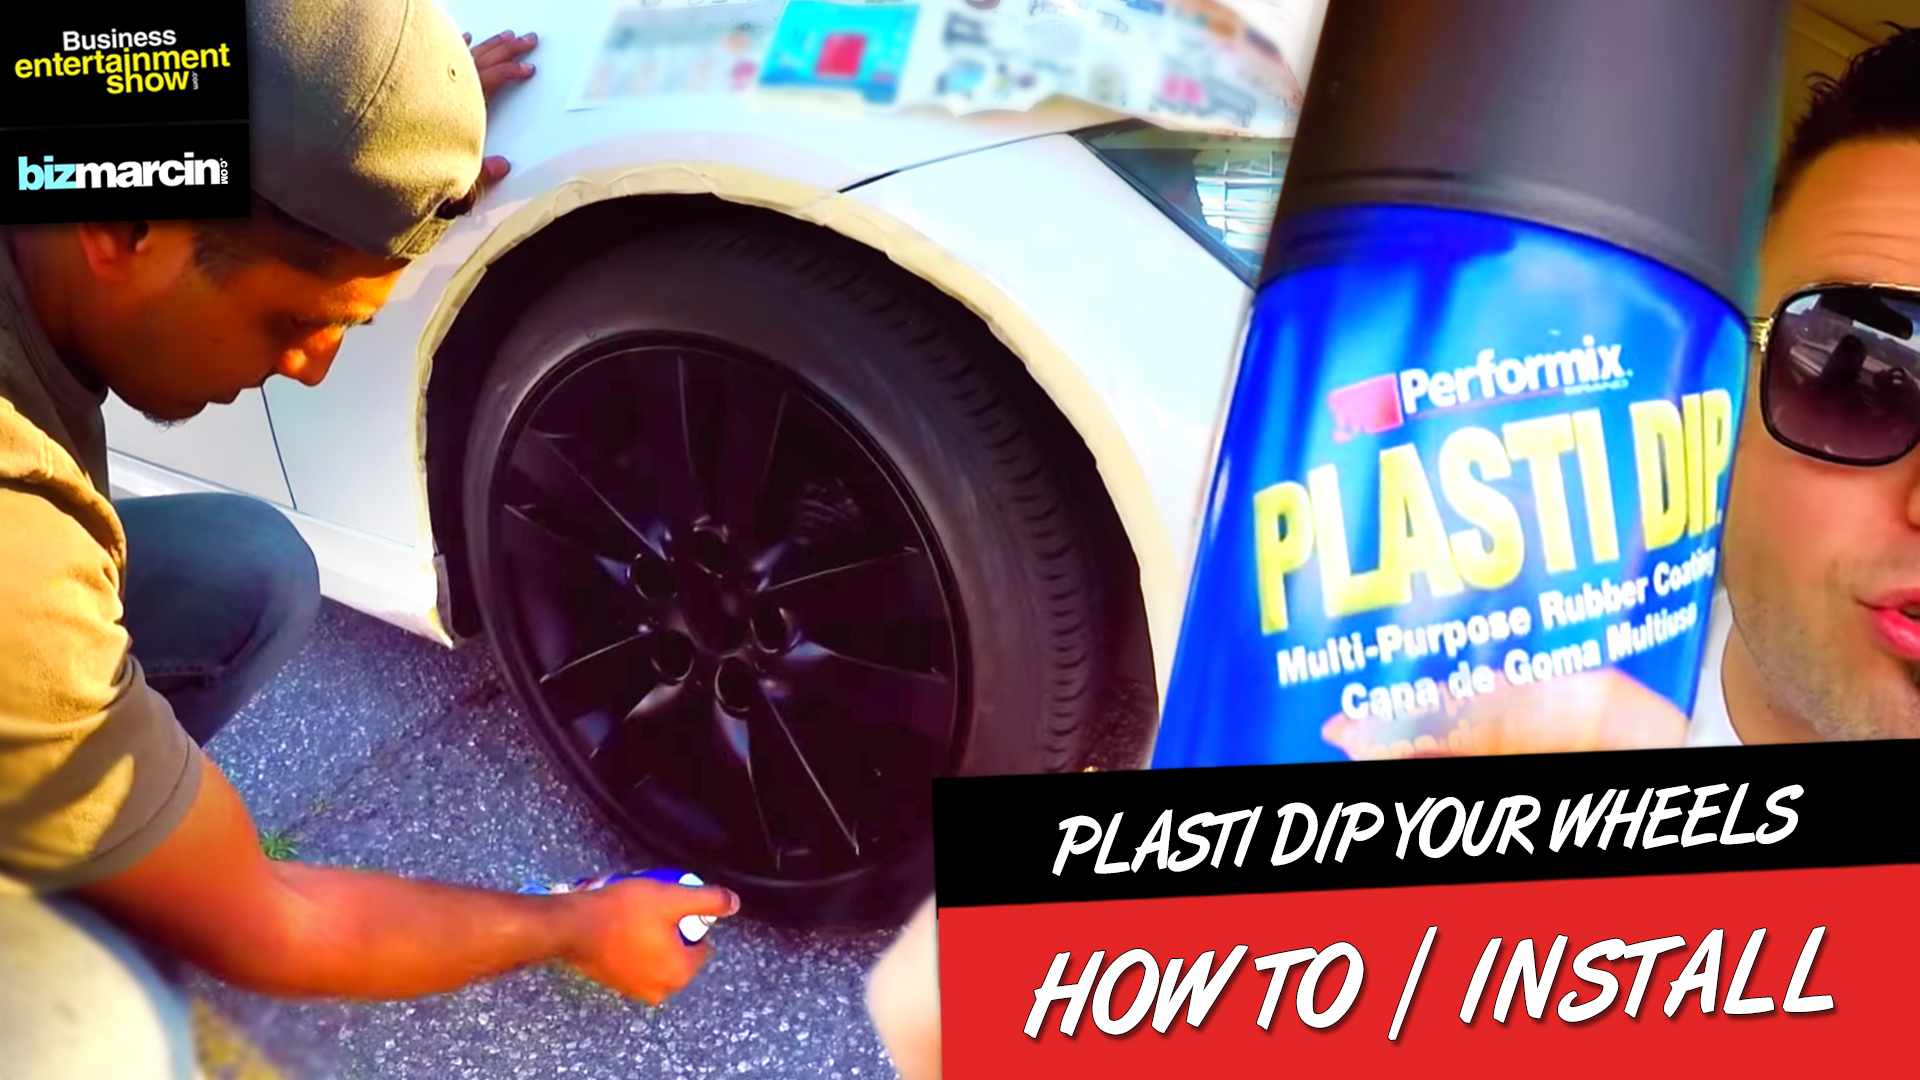 HOW TO PLASTI DIP YOUR WHEELS Without Taking them Off - Complete Guide Start to Finish